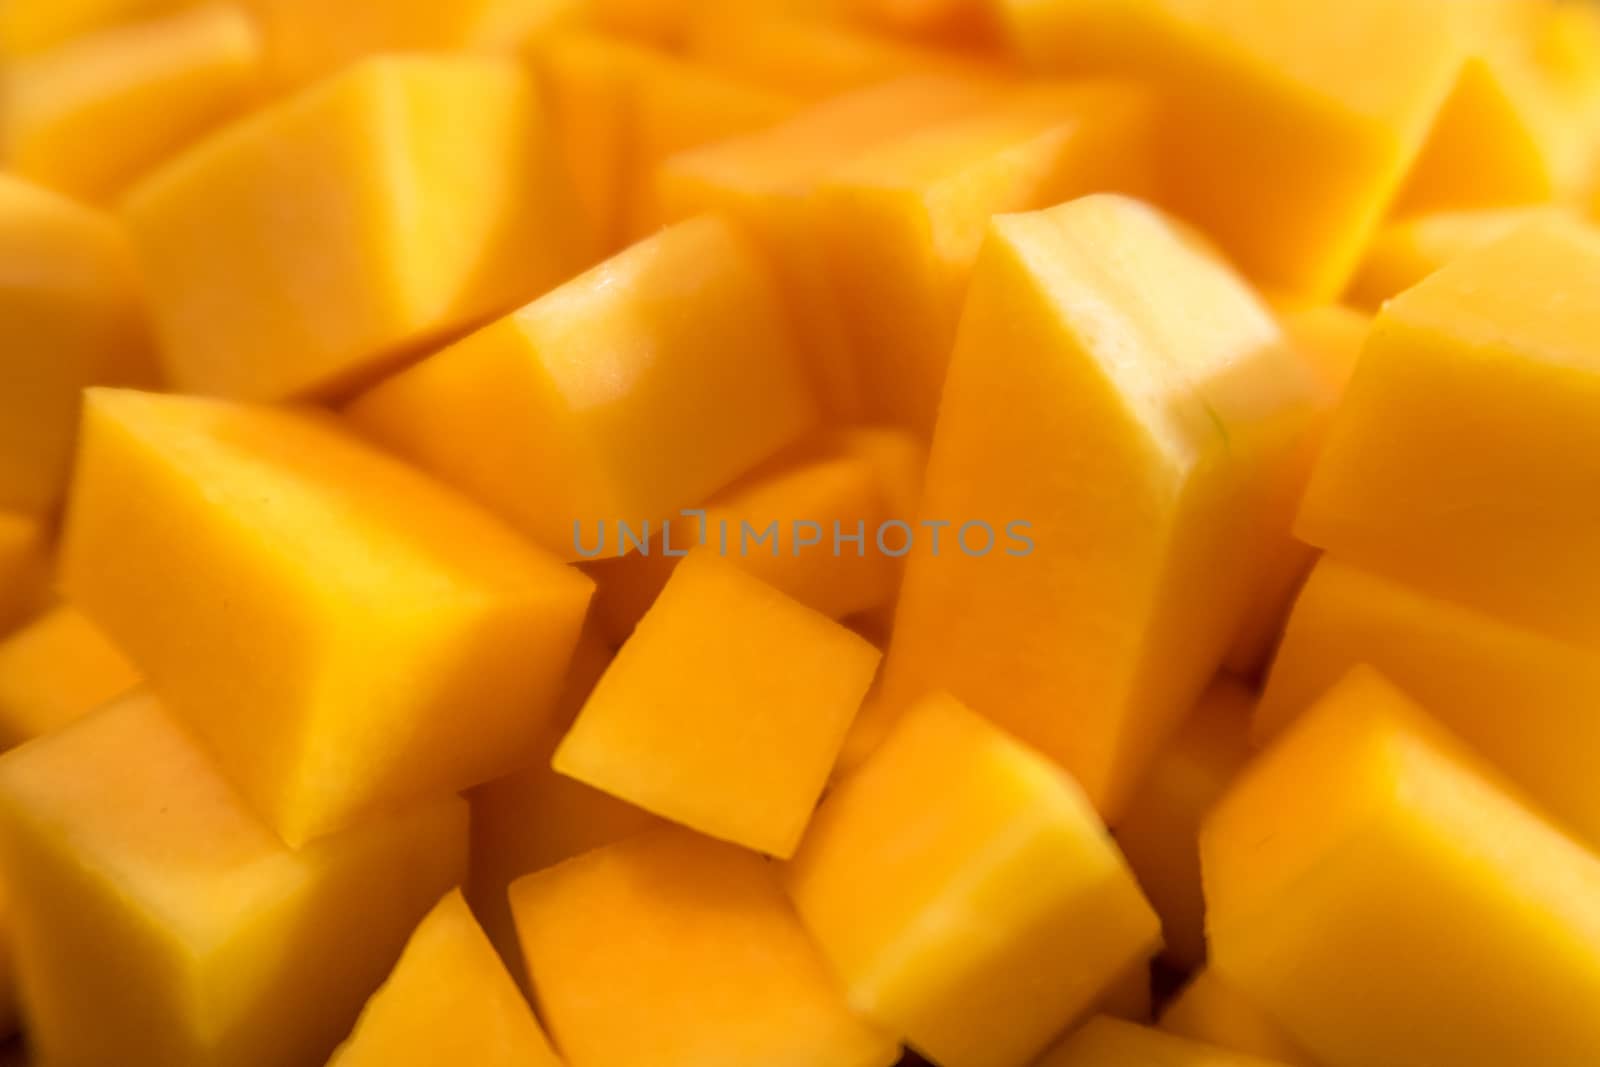 Chopped butternut squash looks like mango texture and color